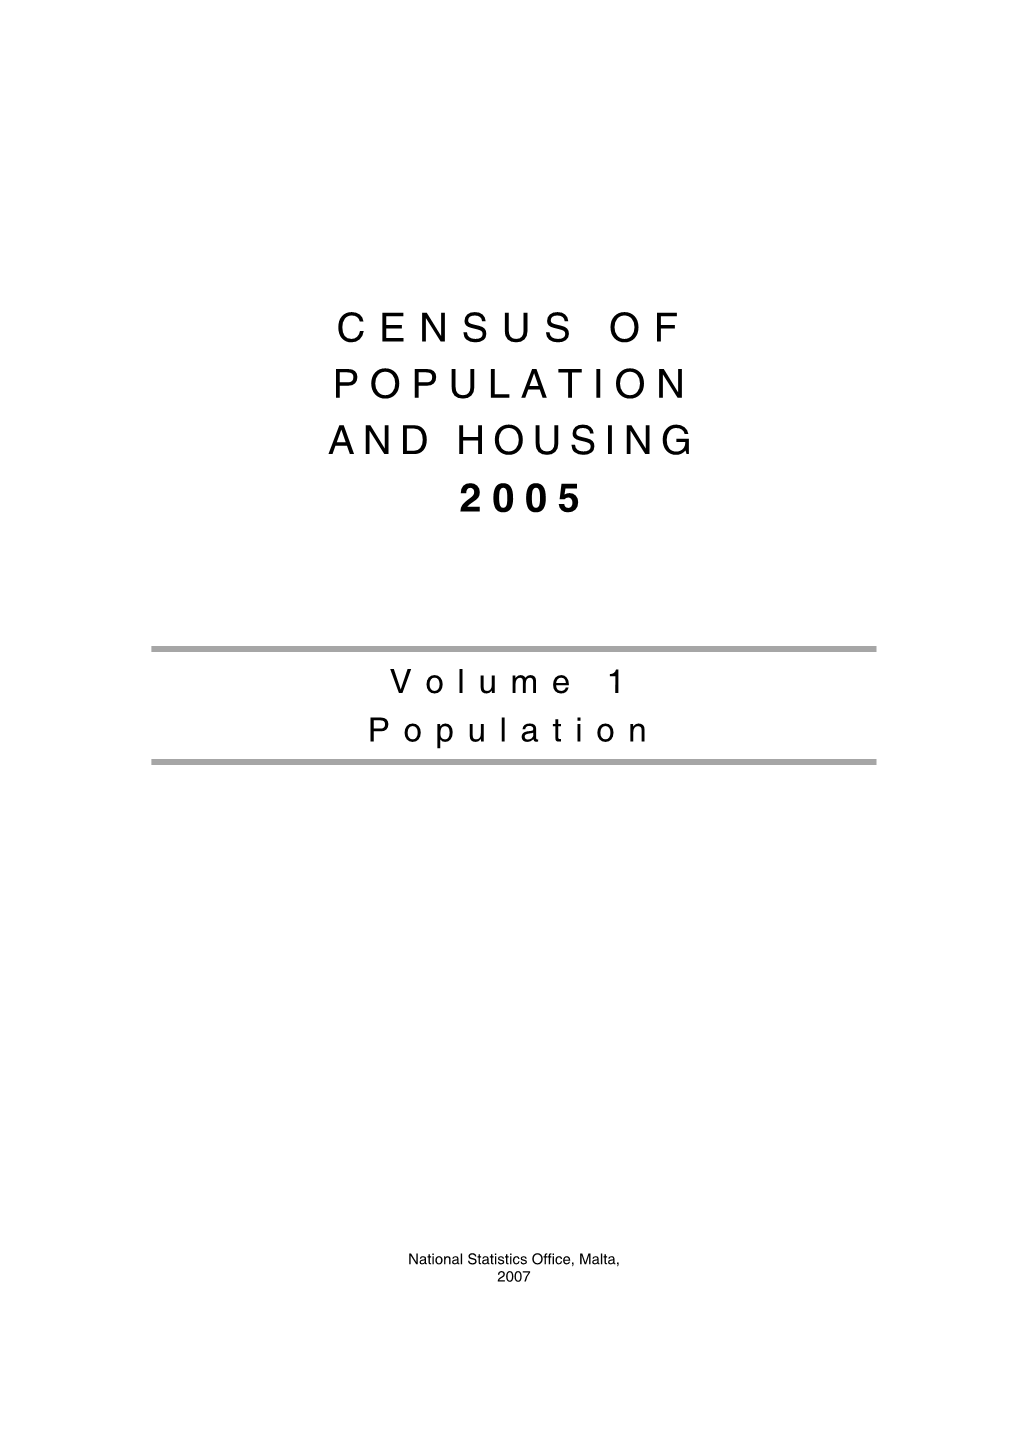 Census of Population and Housing 2005